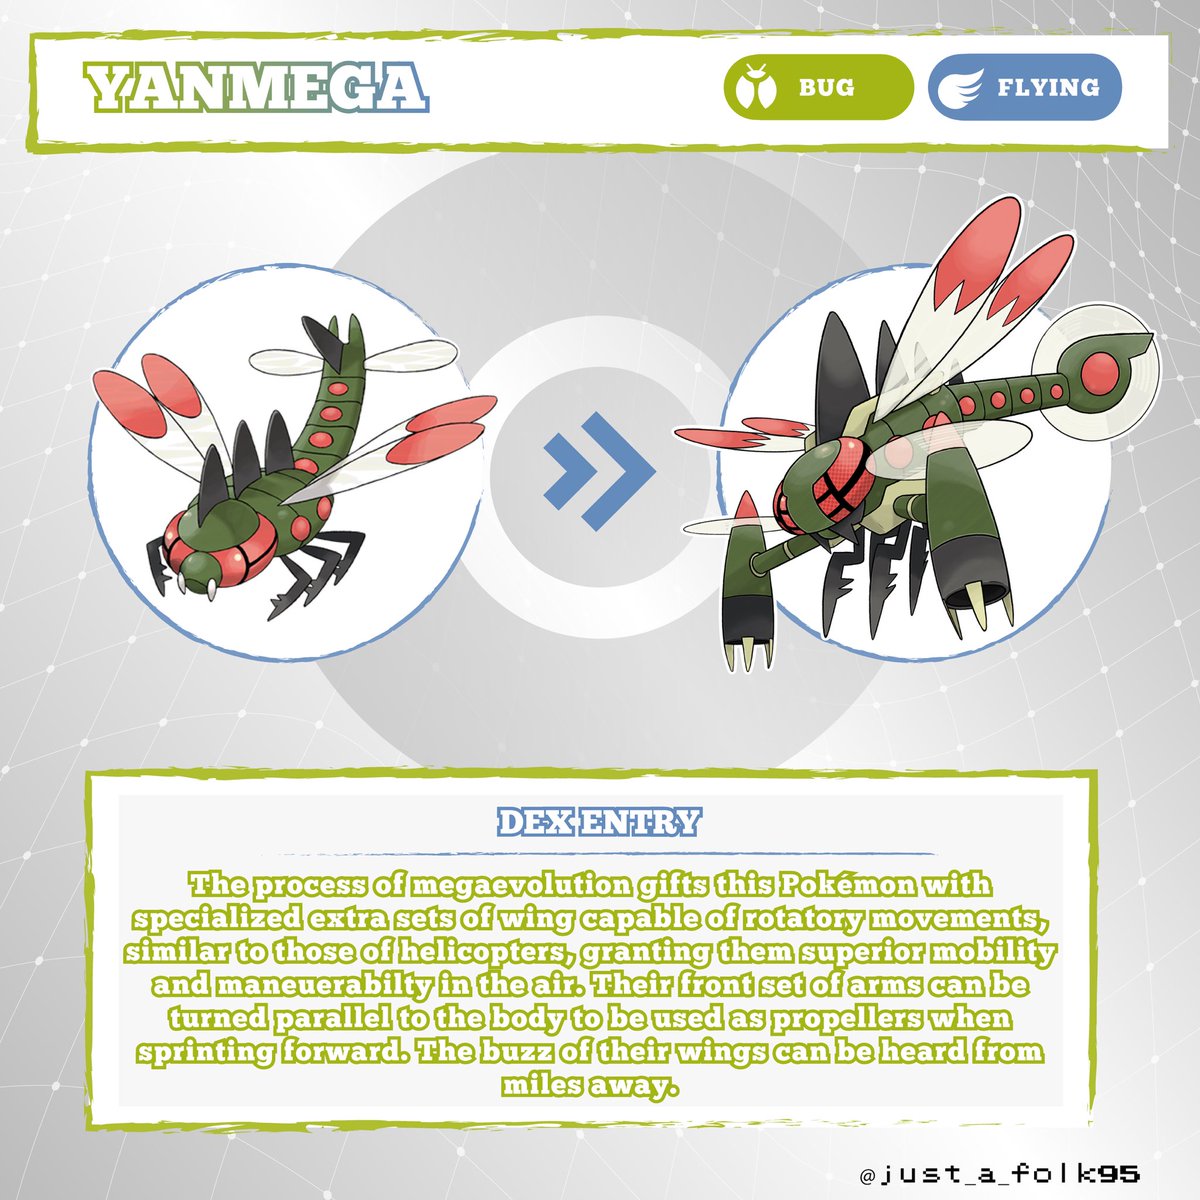 My 3rd and last entry for @PragMagiks' #megamaymagik contest!

The temptation to go for the Bug/Dragon was there, but in the end I kept the original typing (yeah, not even Steel). Took inspiration from Helicopters and Tiltrotors.

#Pokemon #fakemon #megaevolution #PokemonLEGENDS